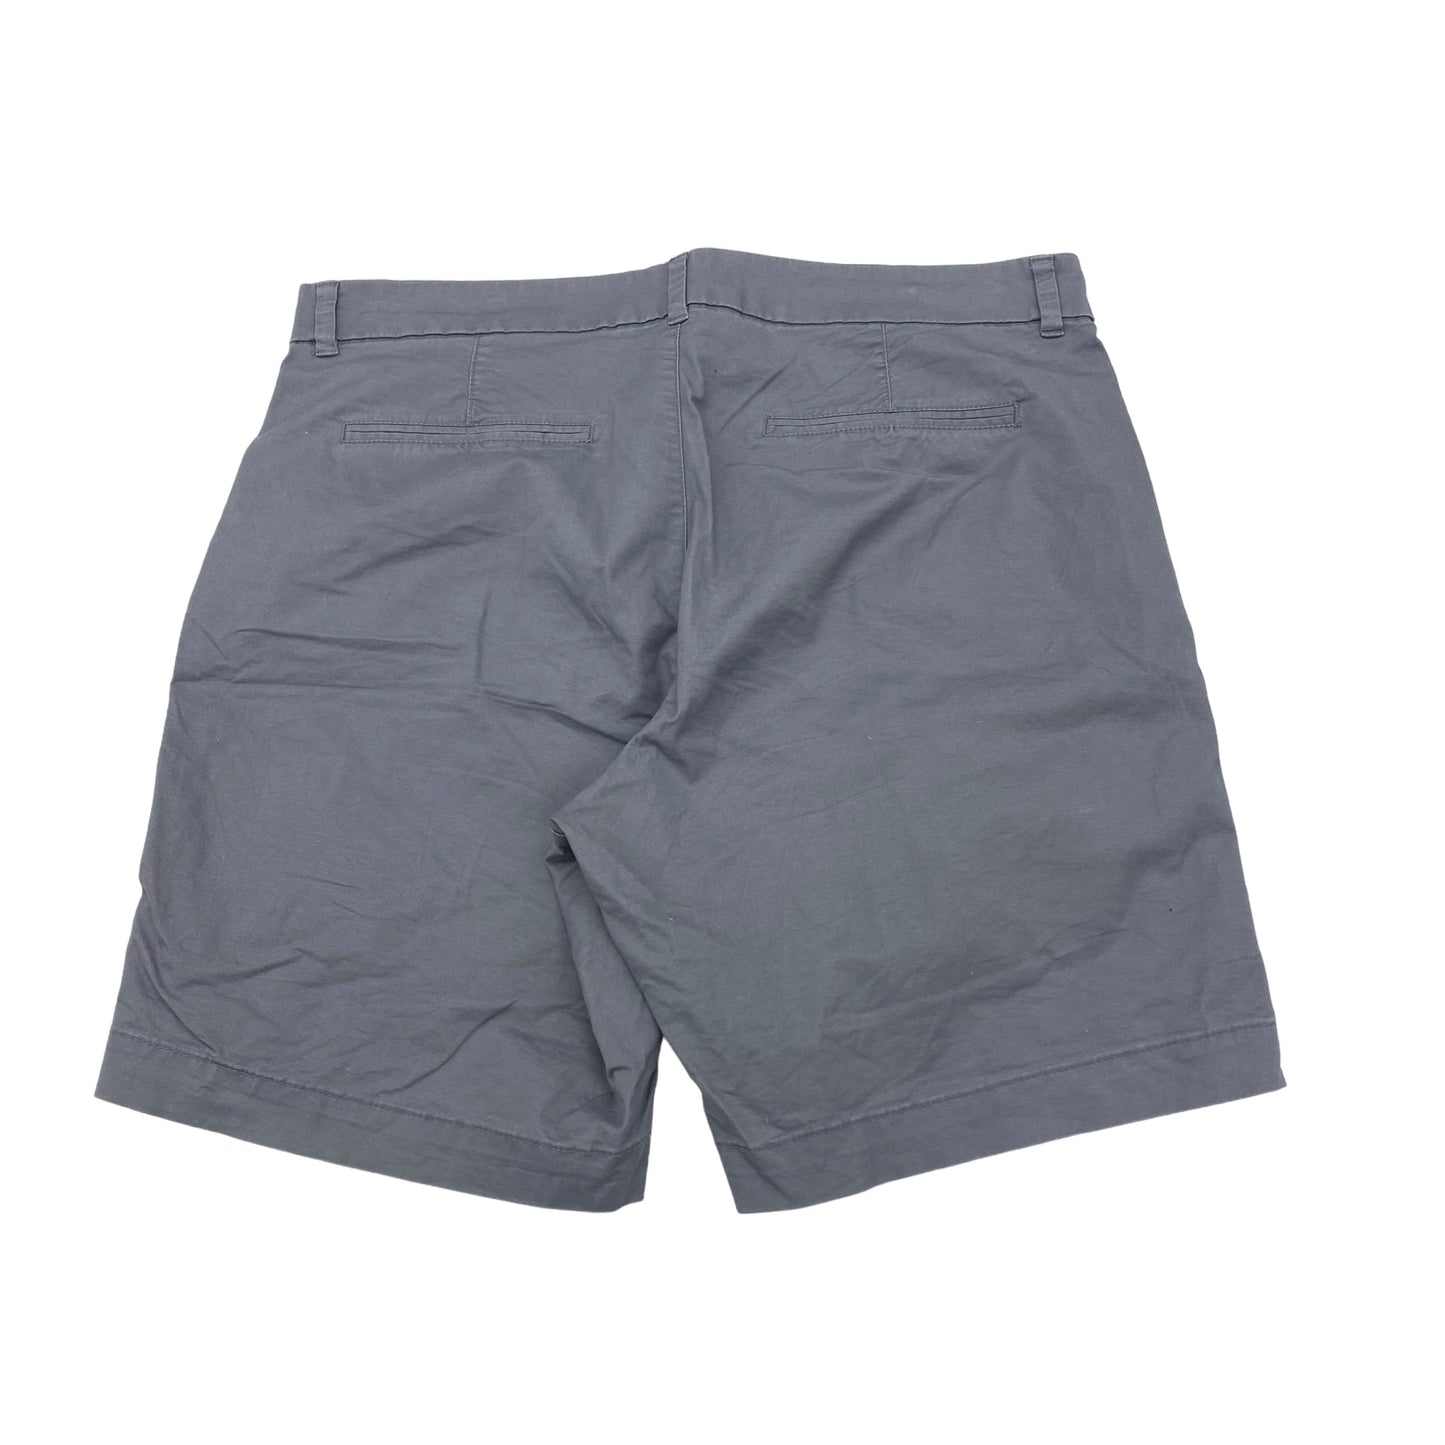 GREY SHORTS by OLD NAVY Size:16